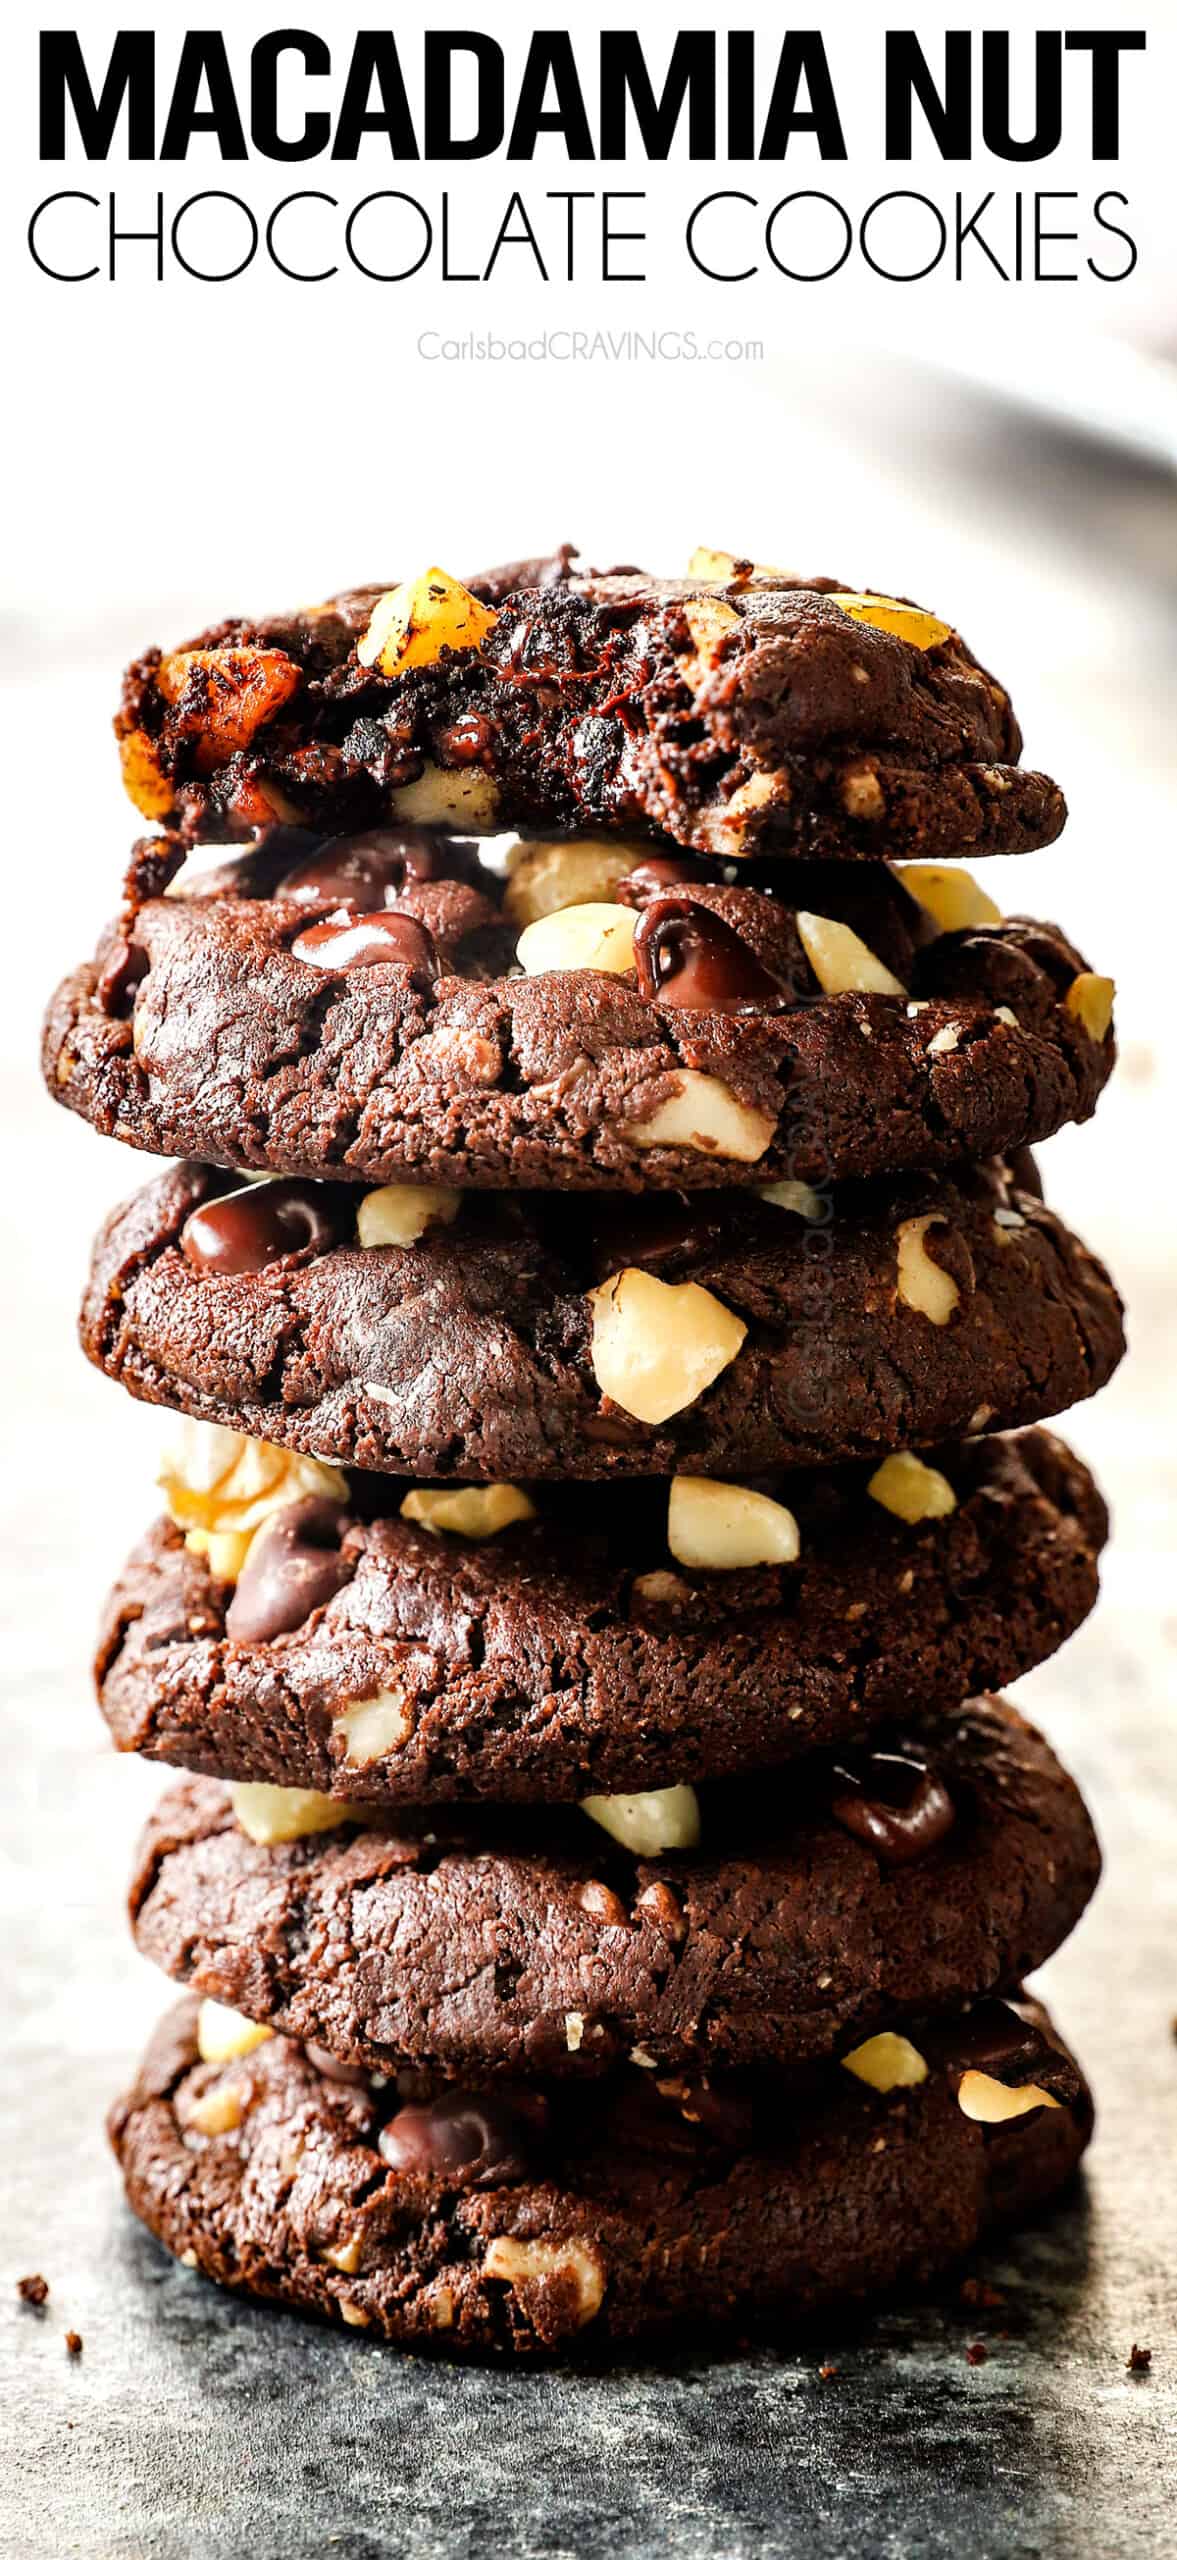 a stack of macadamia nut cookies with a bite taken out of a cookie showing the macadamia nuts and melted chocolate inside